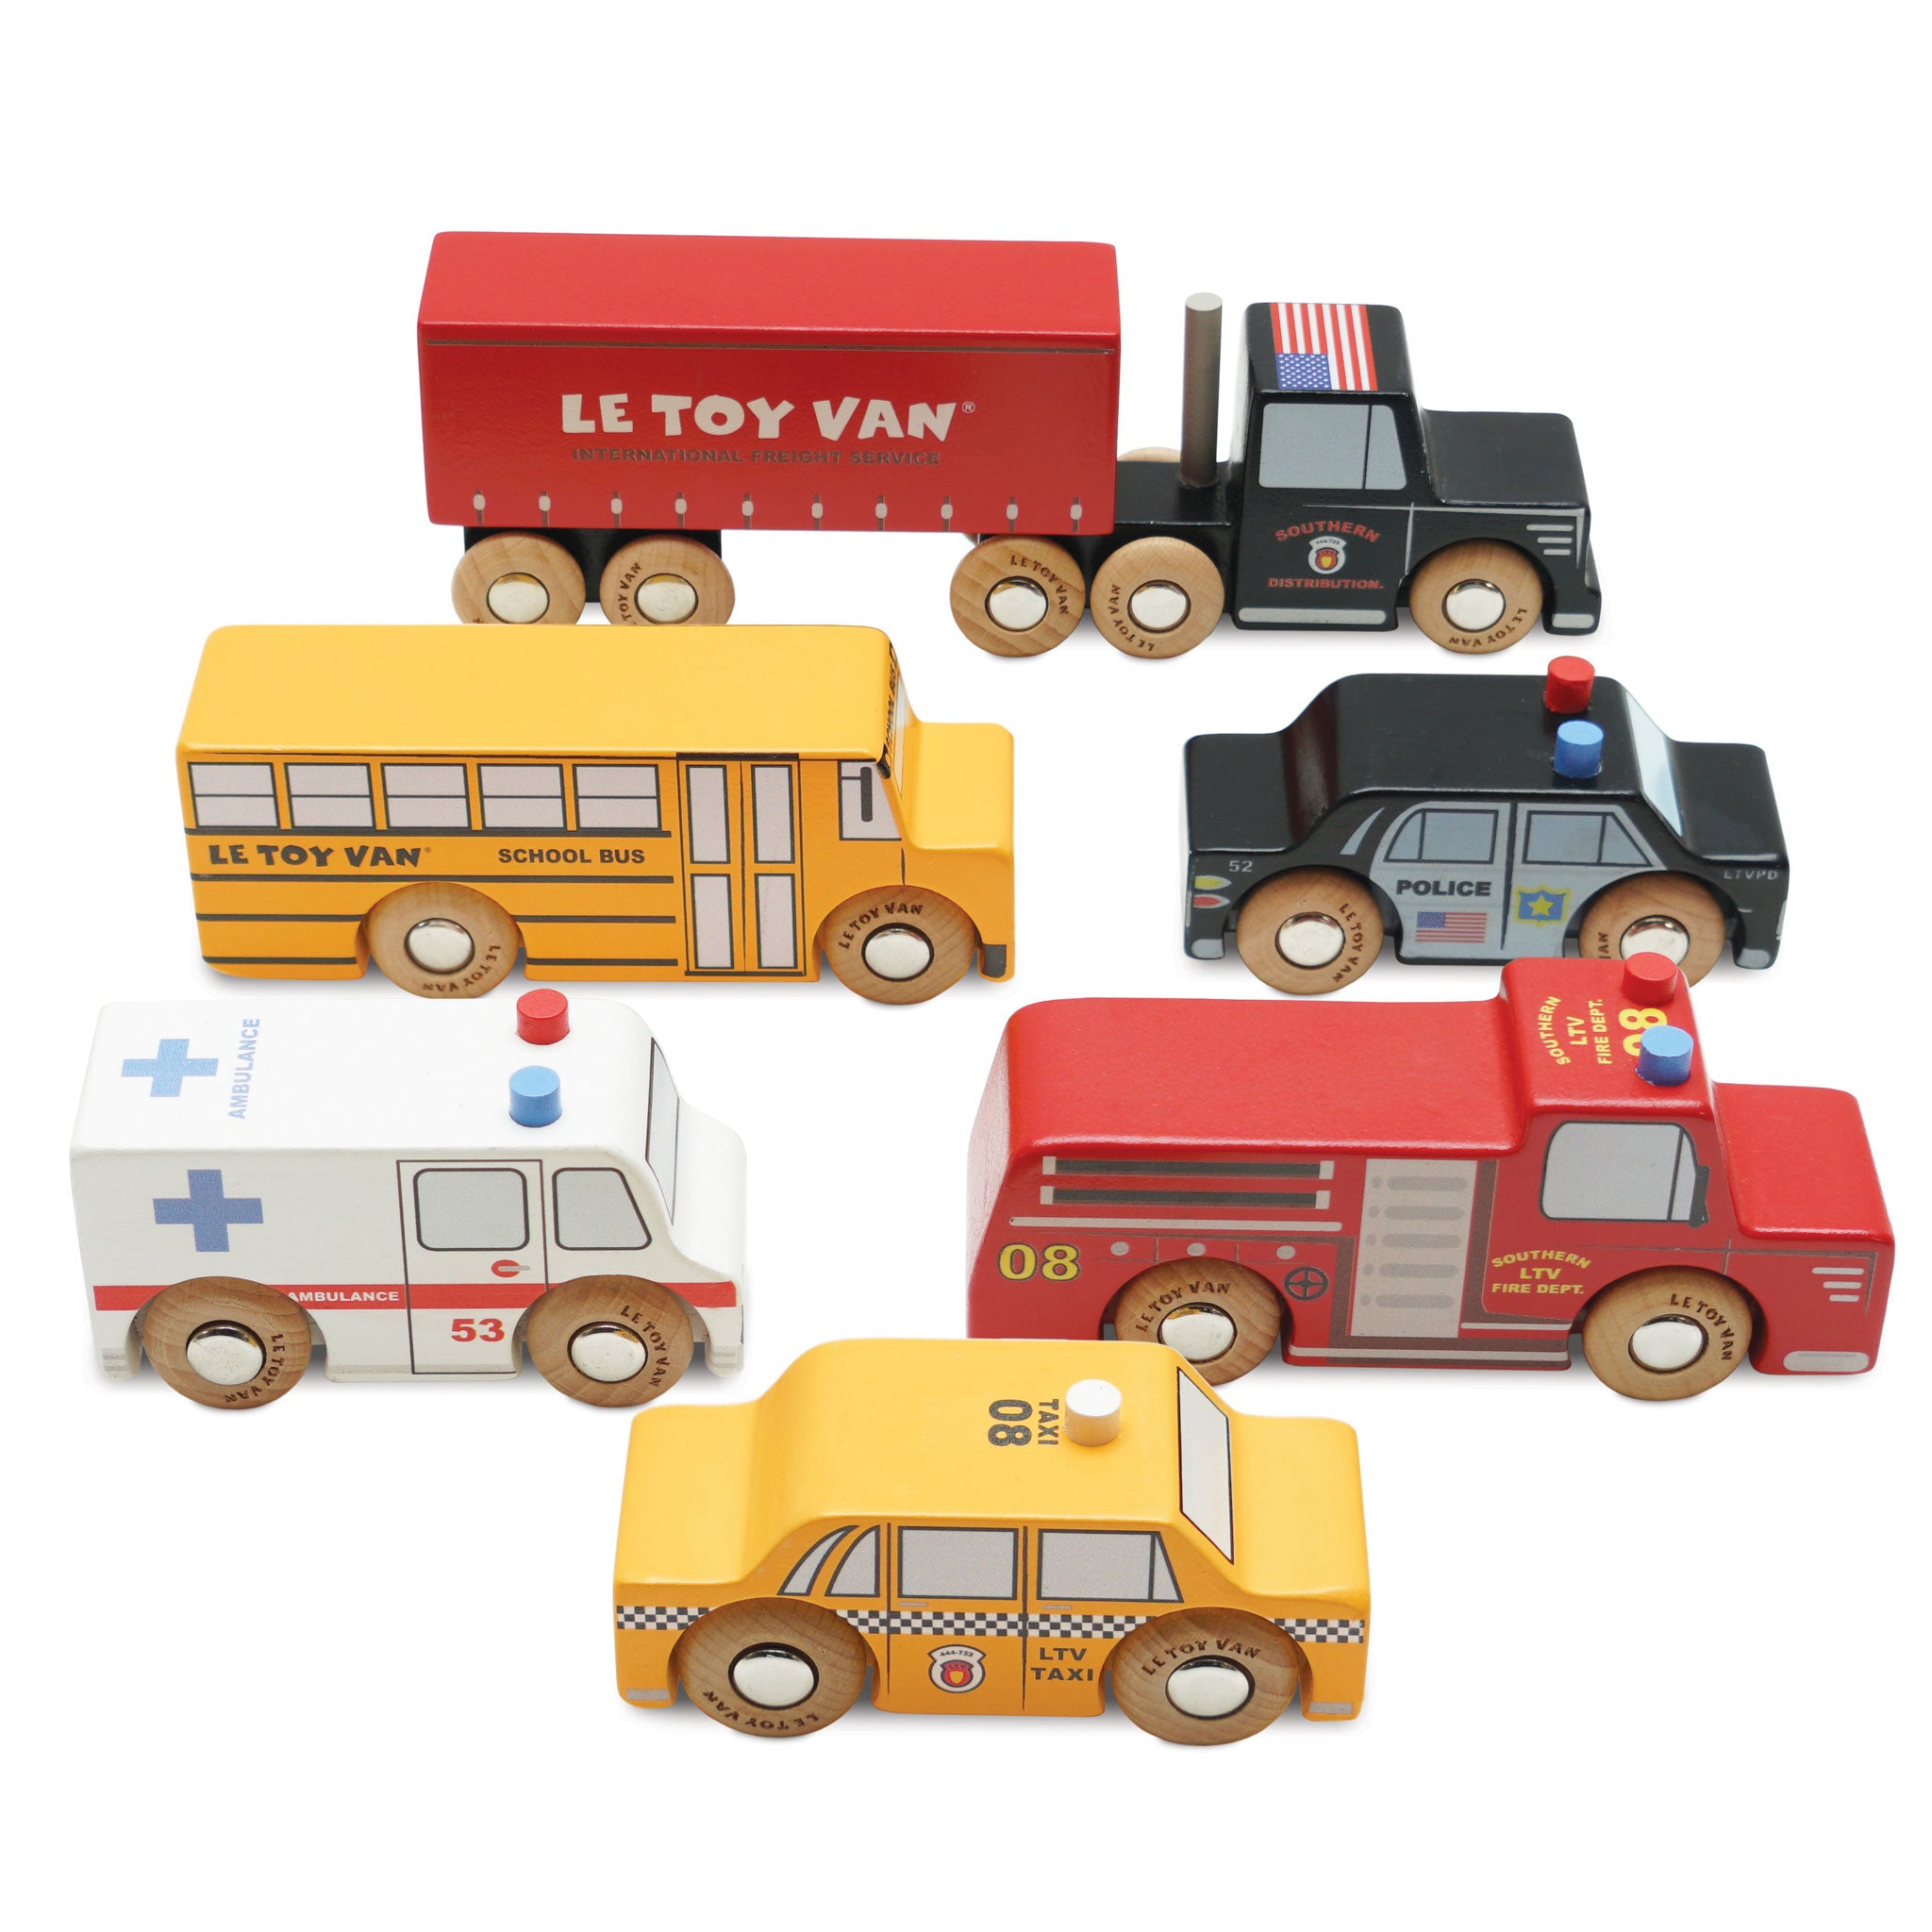 Le Toy Van New York Set of Wooden Cars